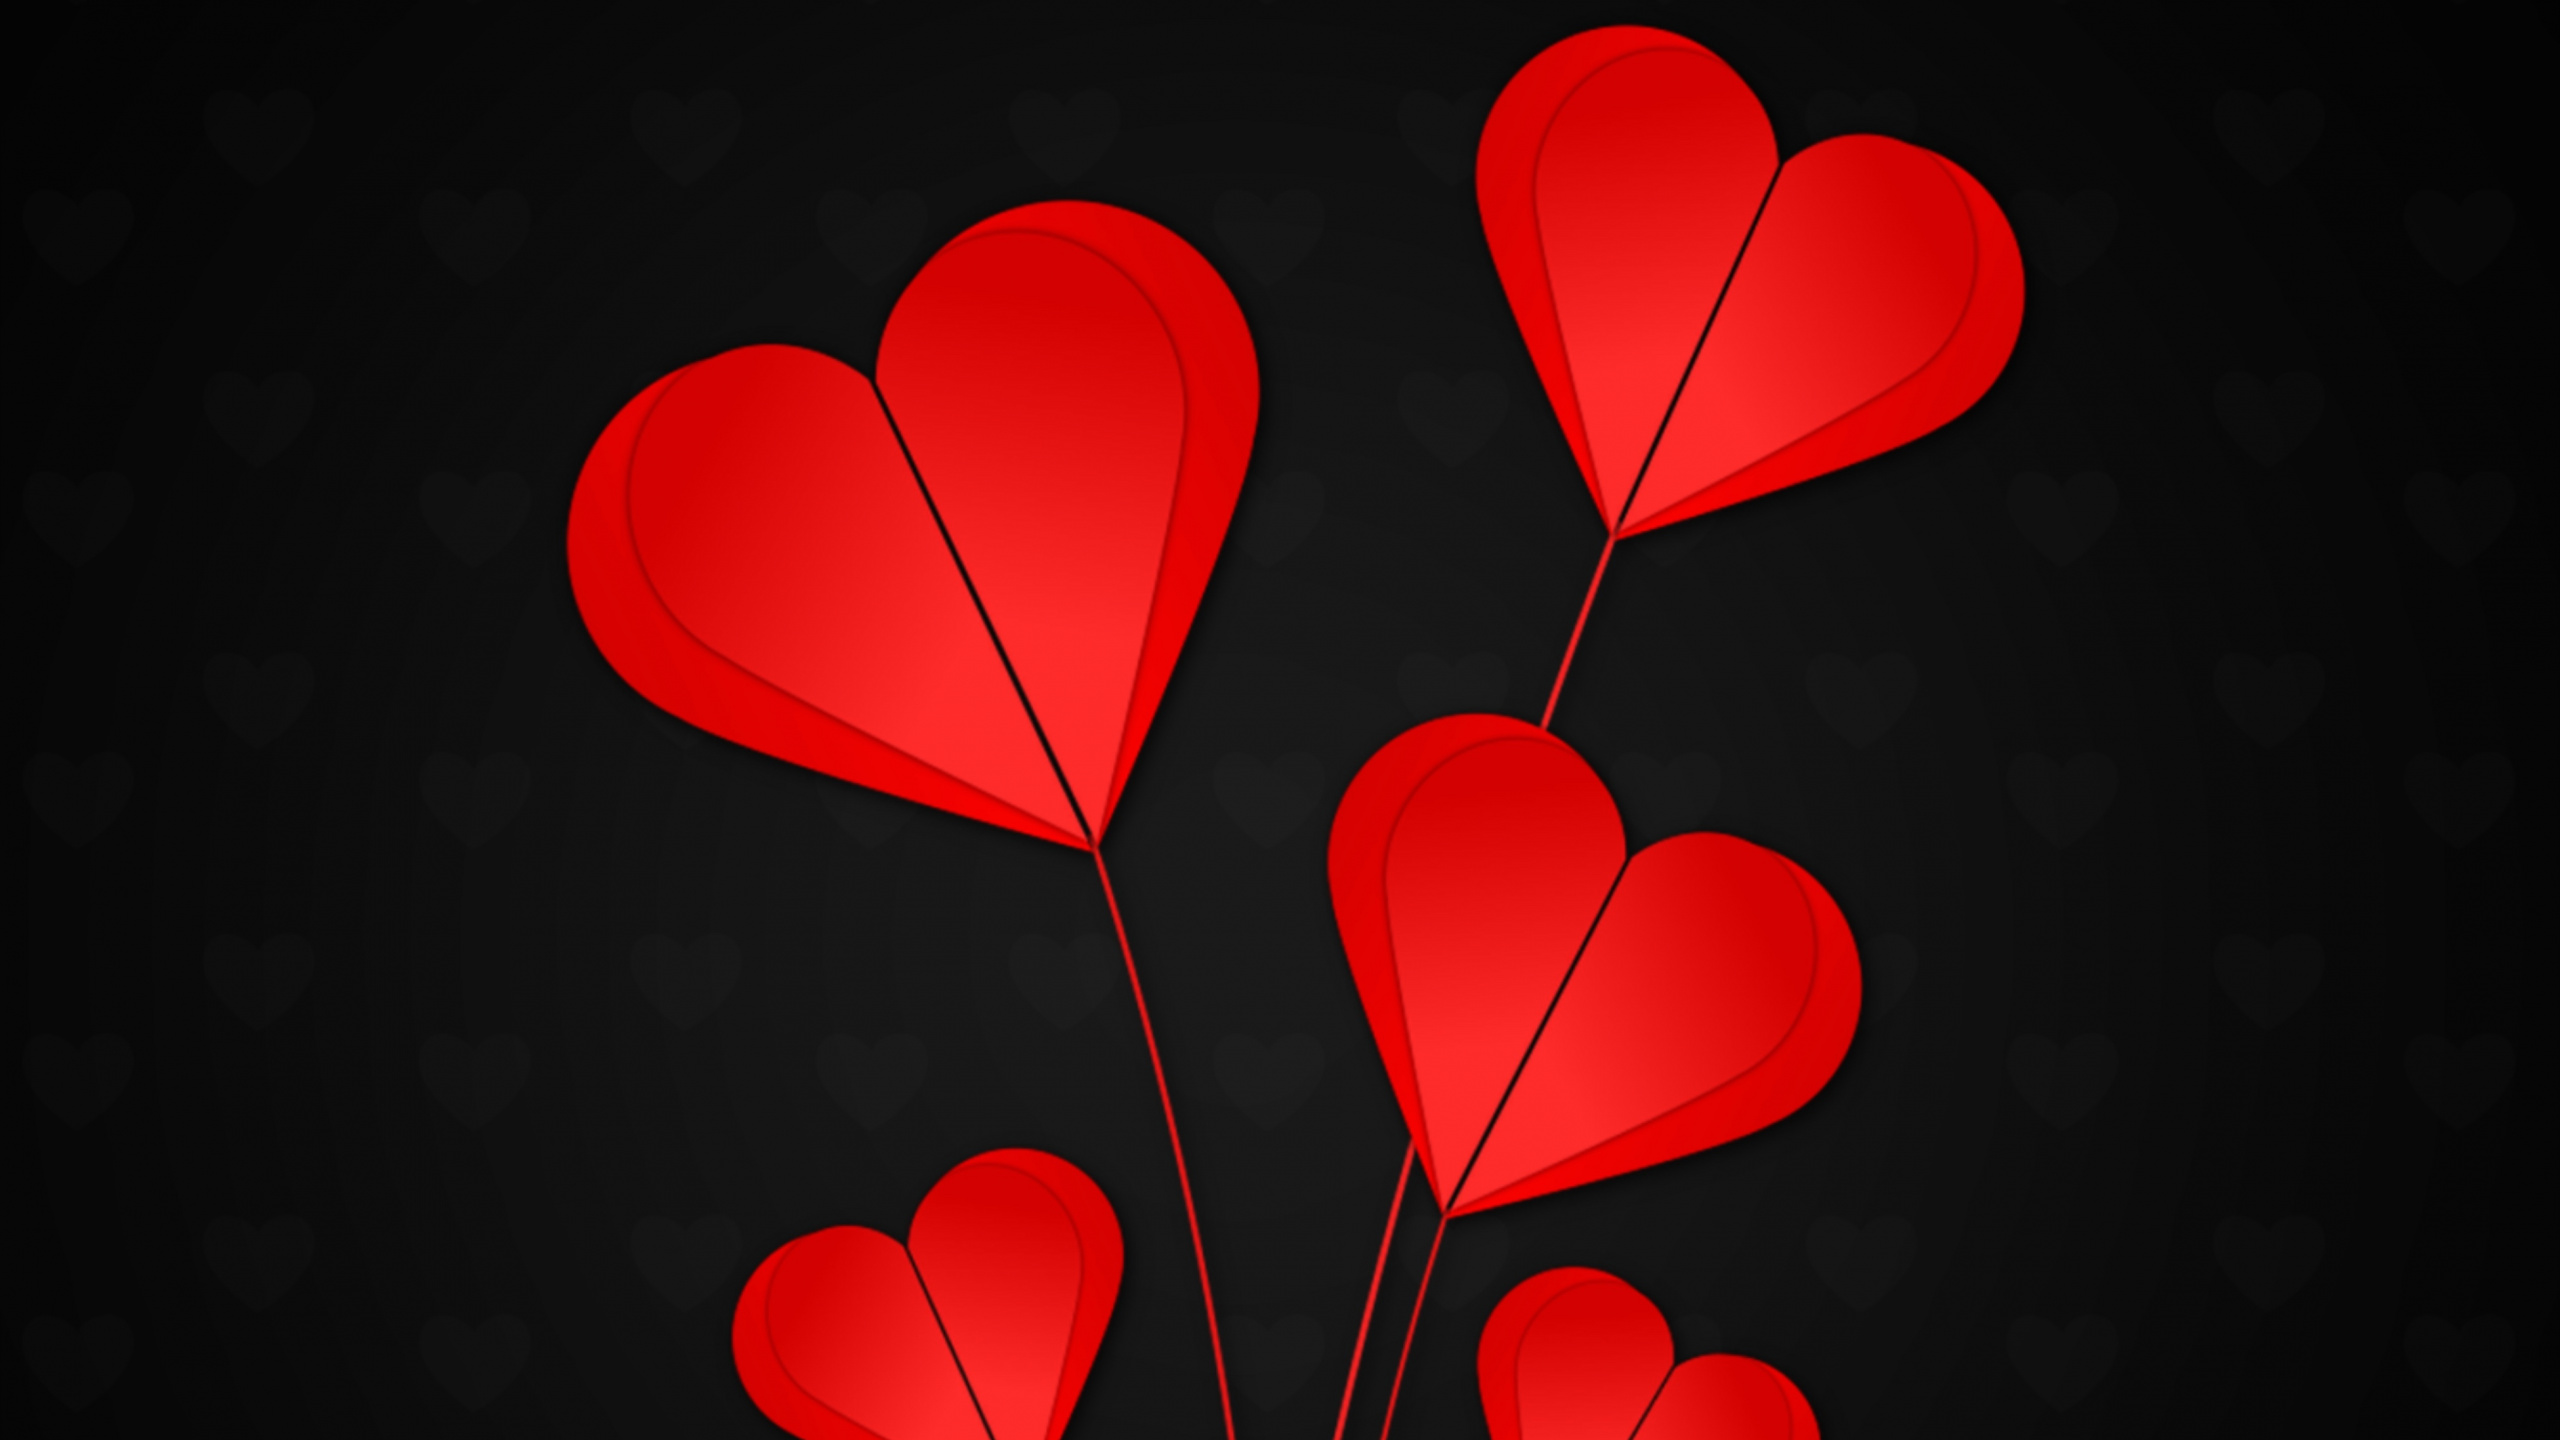 Heart, Red, Petal, Love, Valentines Day. Wallpaper in 2560x1440 Resolution